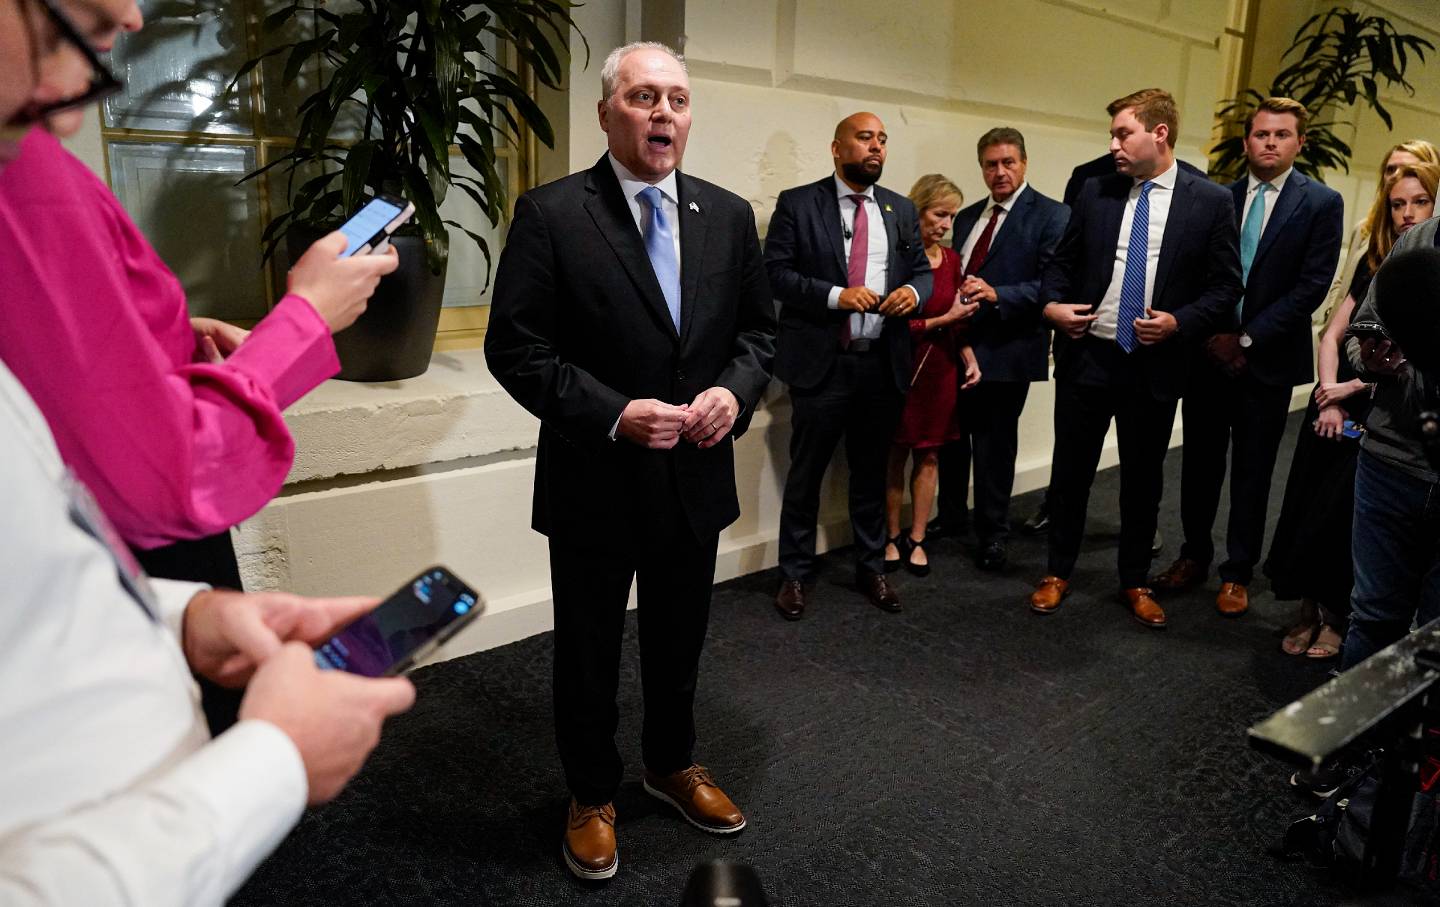 House majority leader Steve Scalise (R-La.) announces that he is pulling out of the race to become speaker following a House Republican Conference meeting on Capitol Hill on Thursday evening, October 12, 2023, in Washington, D.C.